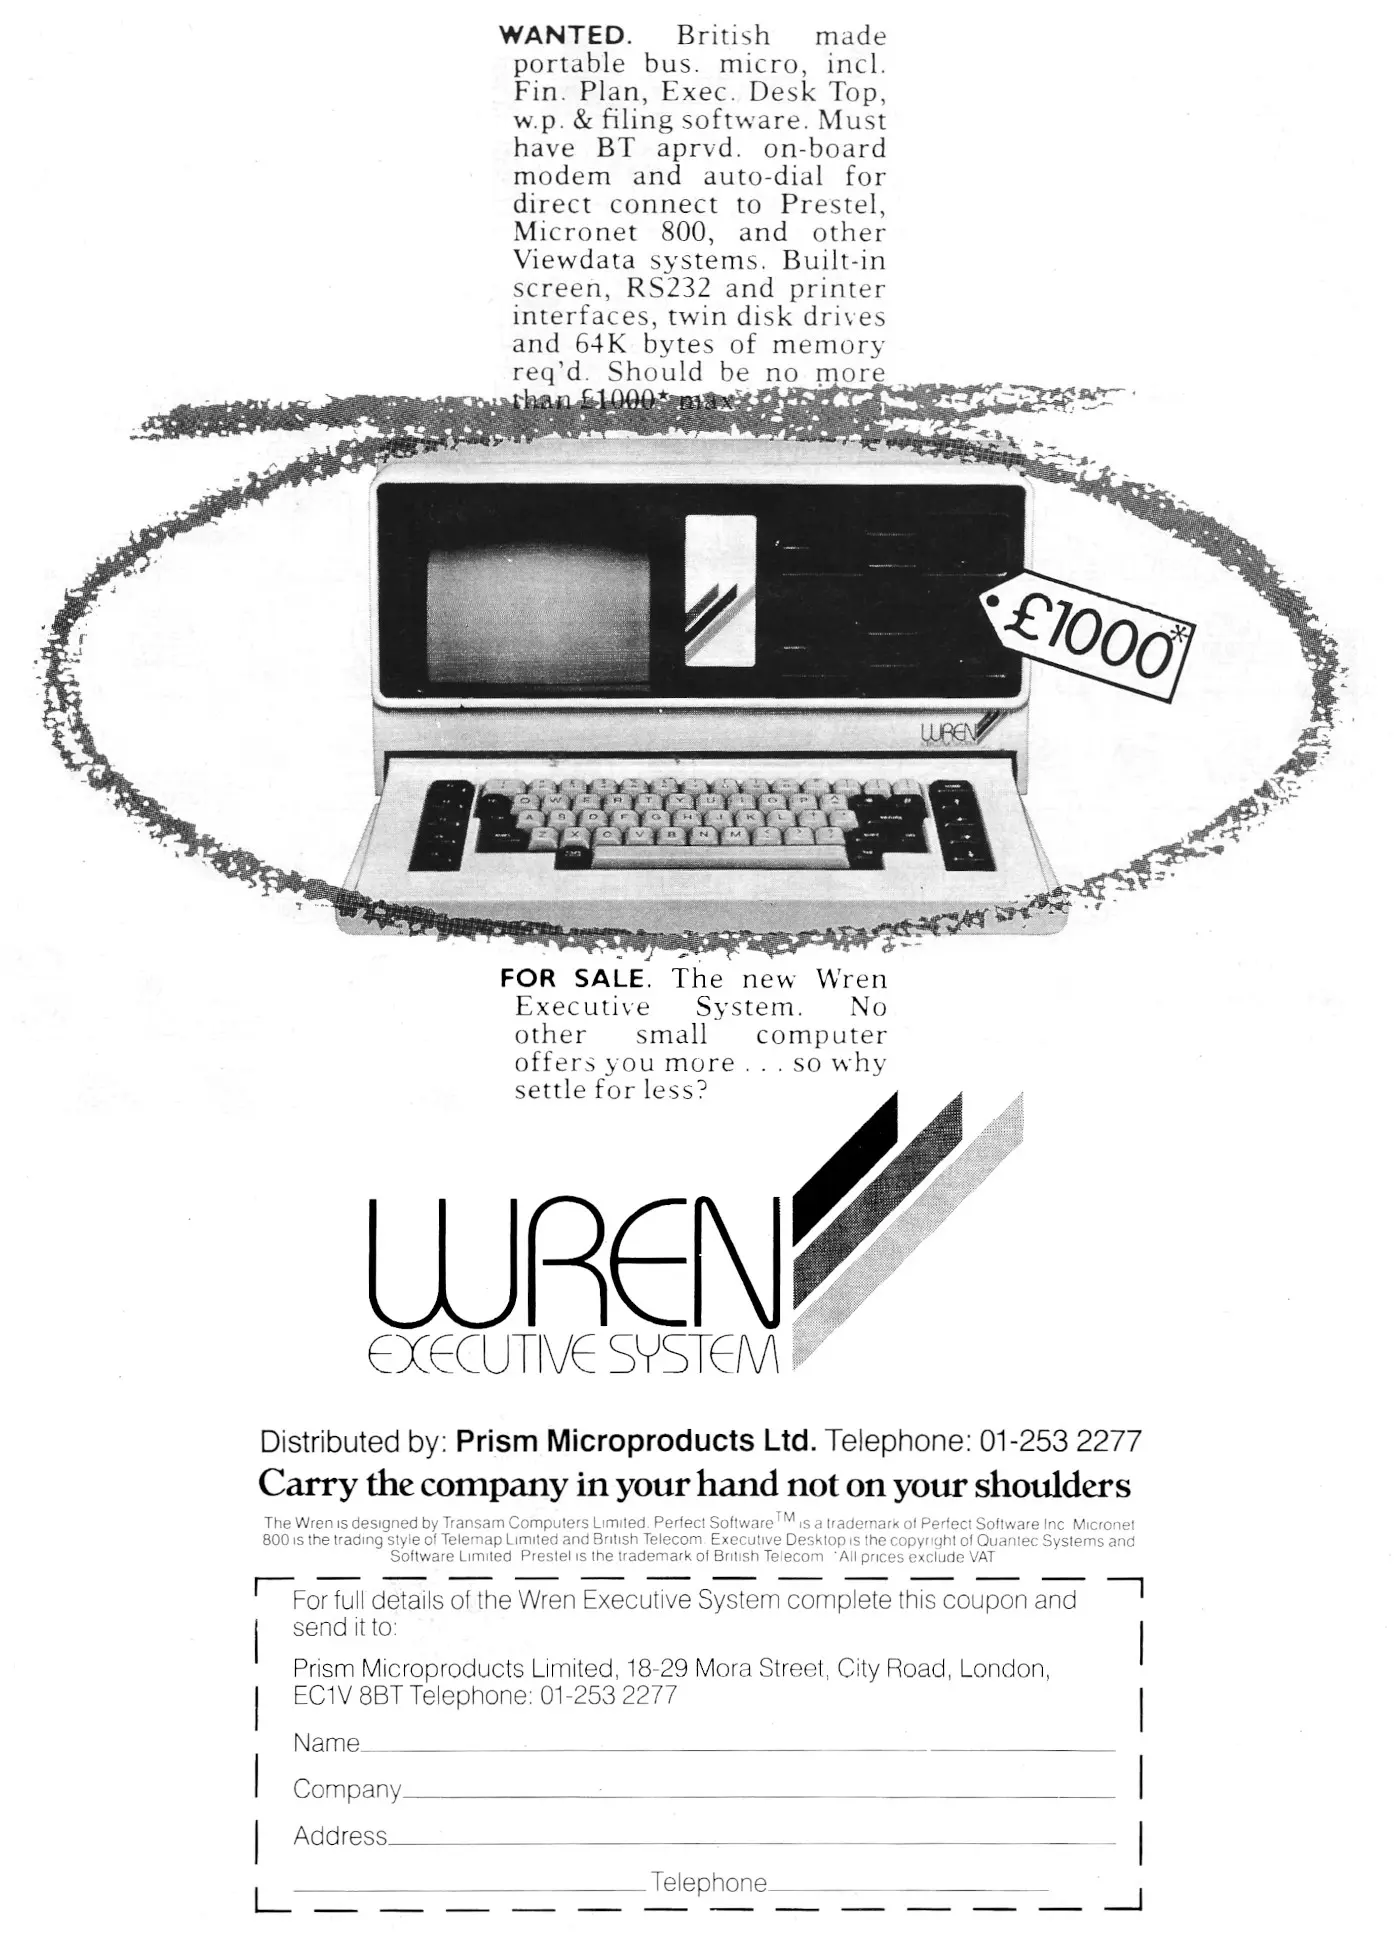 Wren Computers Advert: The Wren Executive: Carry the company in your hand, not on your shoulders, from Personal Computer World, December 1984